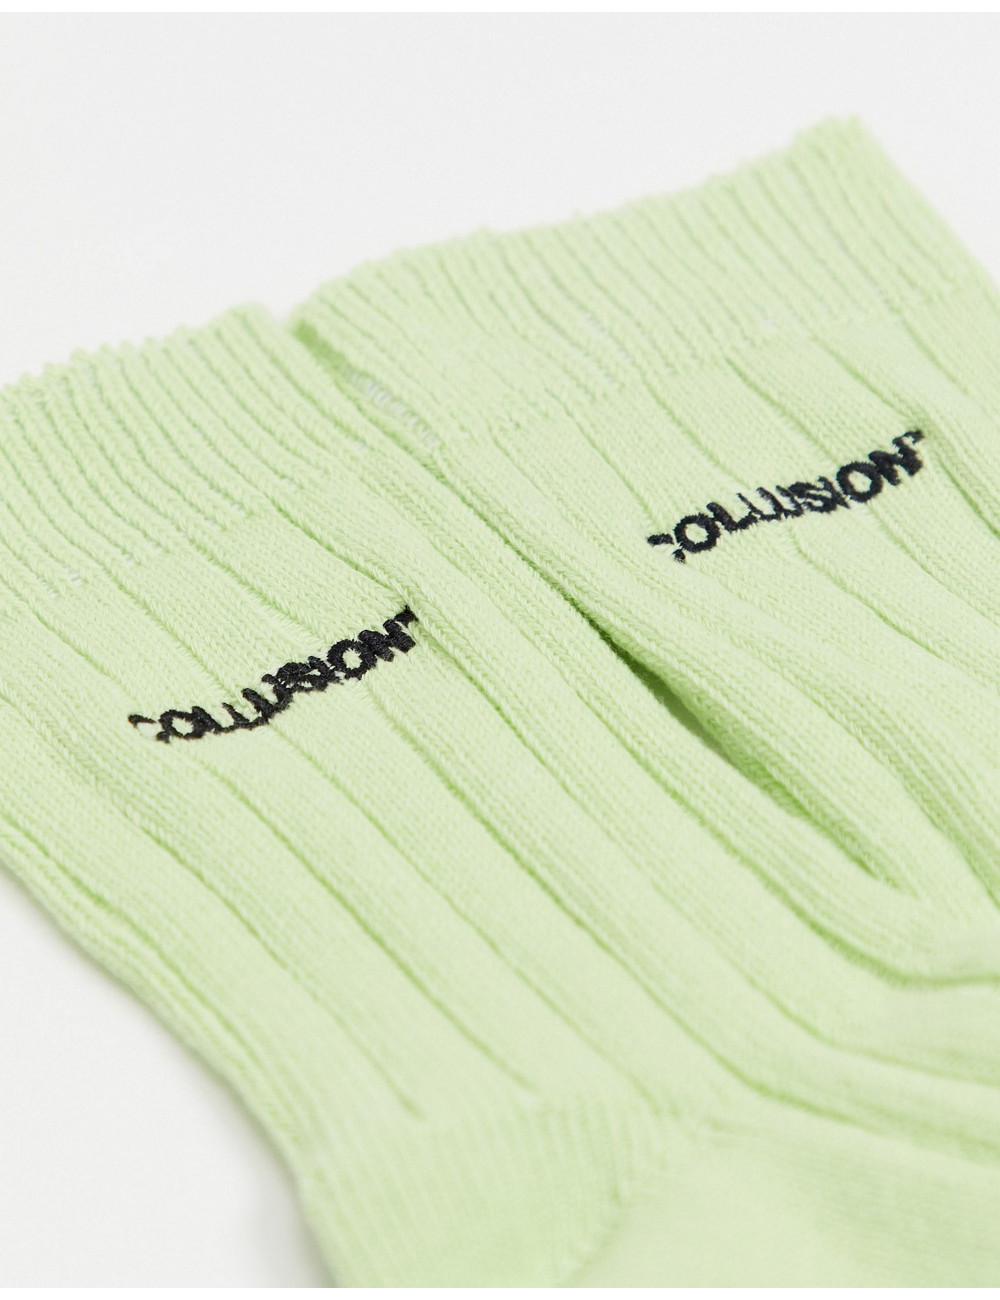 COLLUSION Unisex socks with...